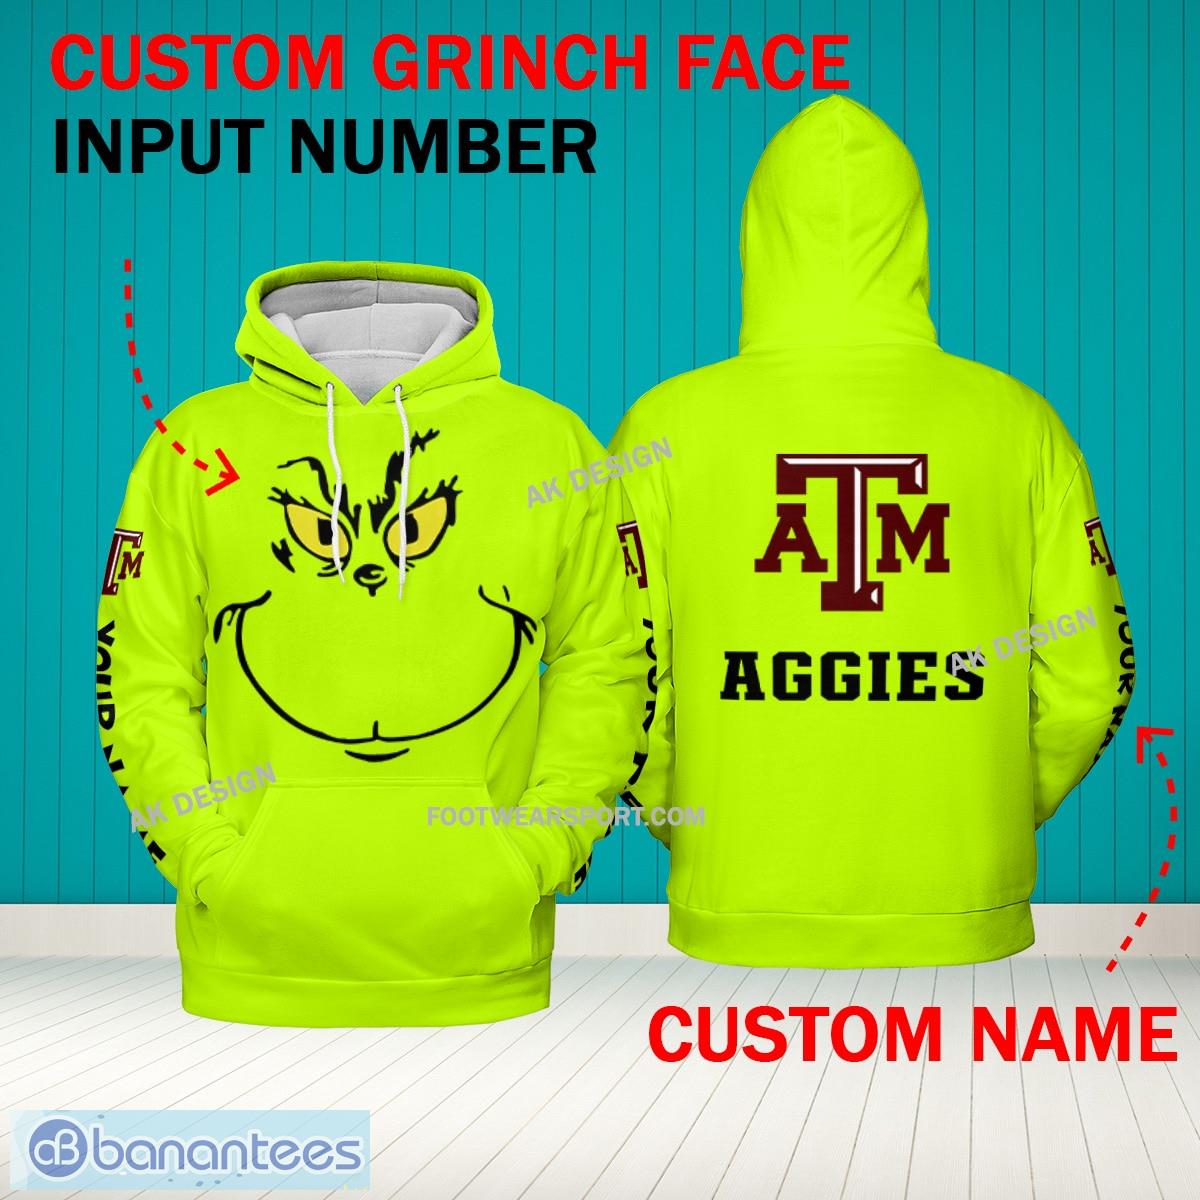 Grinch Face Texas A&M Aggies 3D Hoodie, Zip Hoodie, Sweater Green AOP Custom Number And Name - Grinch Face NCAA Texas A&M Aggies 3D Hoodie